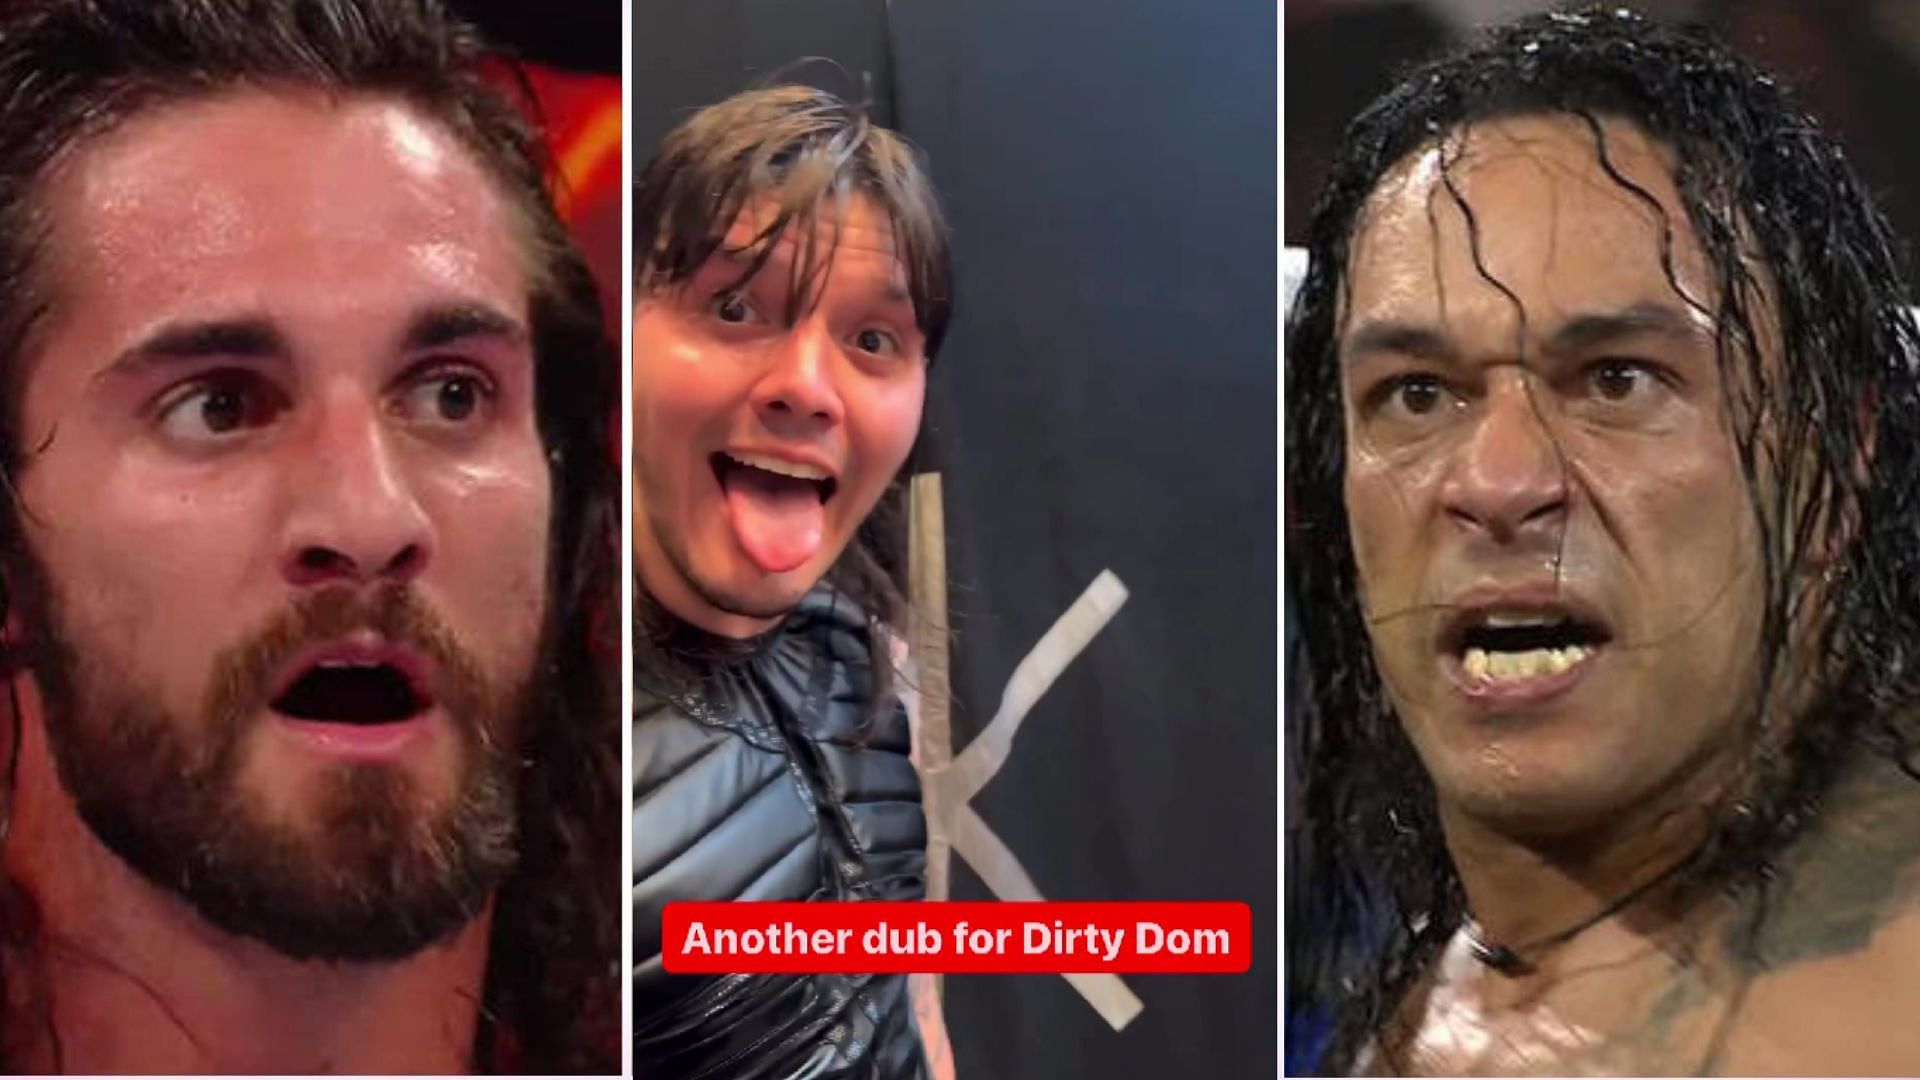 Seth Rollins on the left, Dominik Mysterio in the middle, Damian Priest on the right